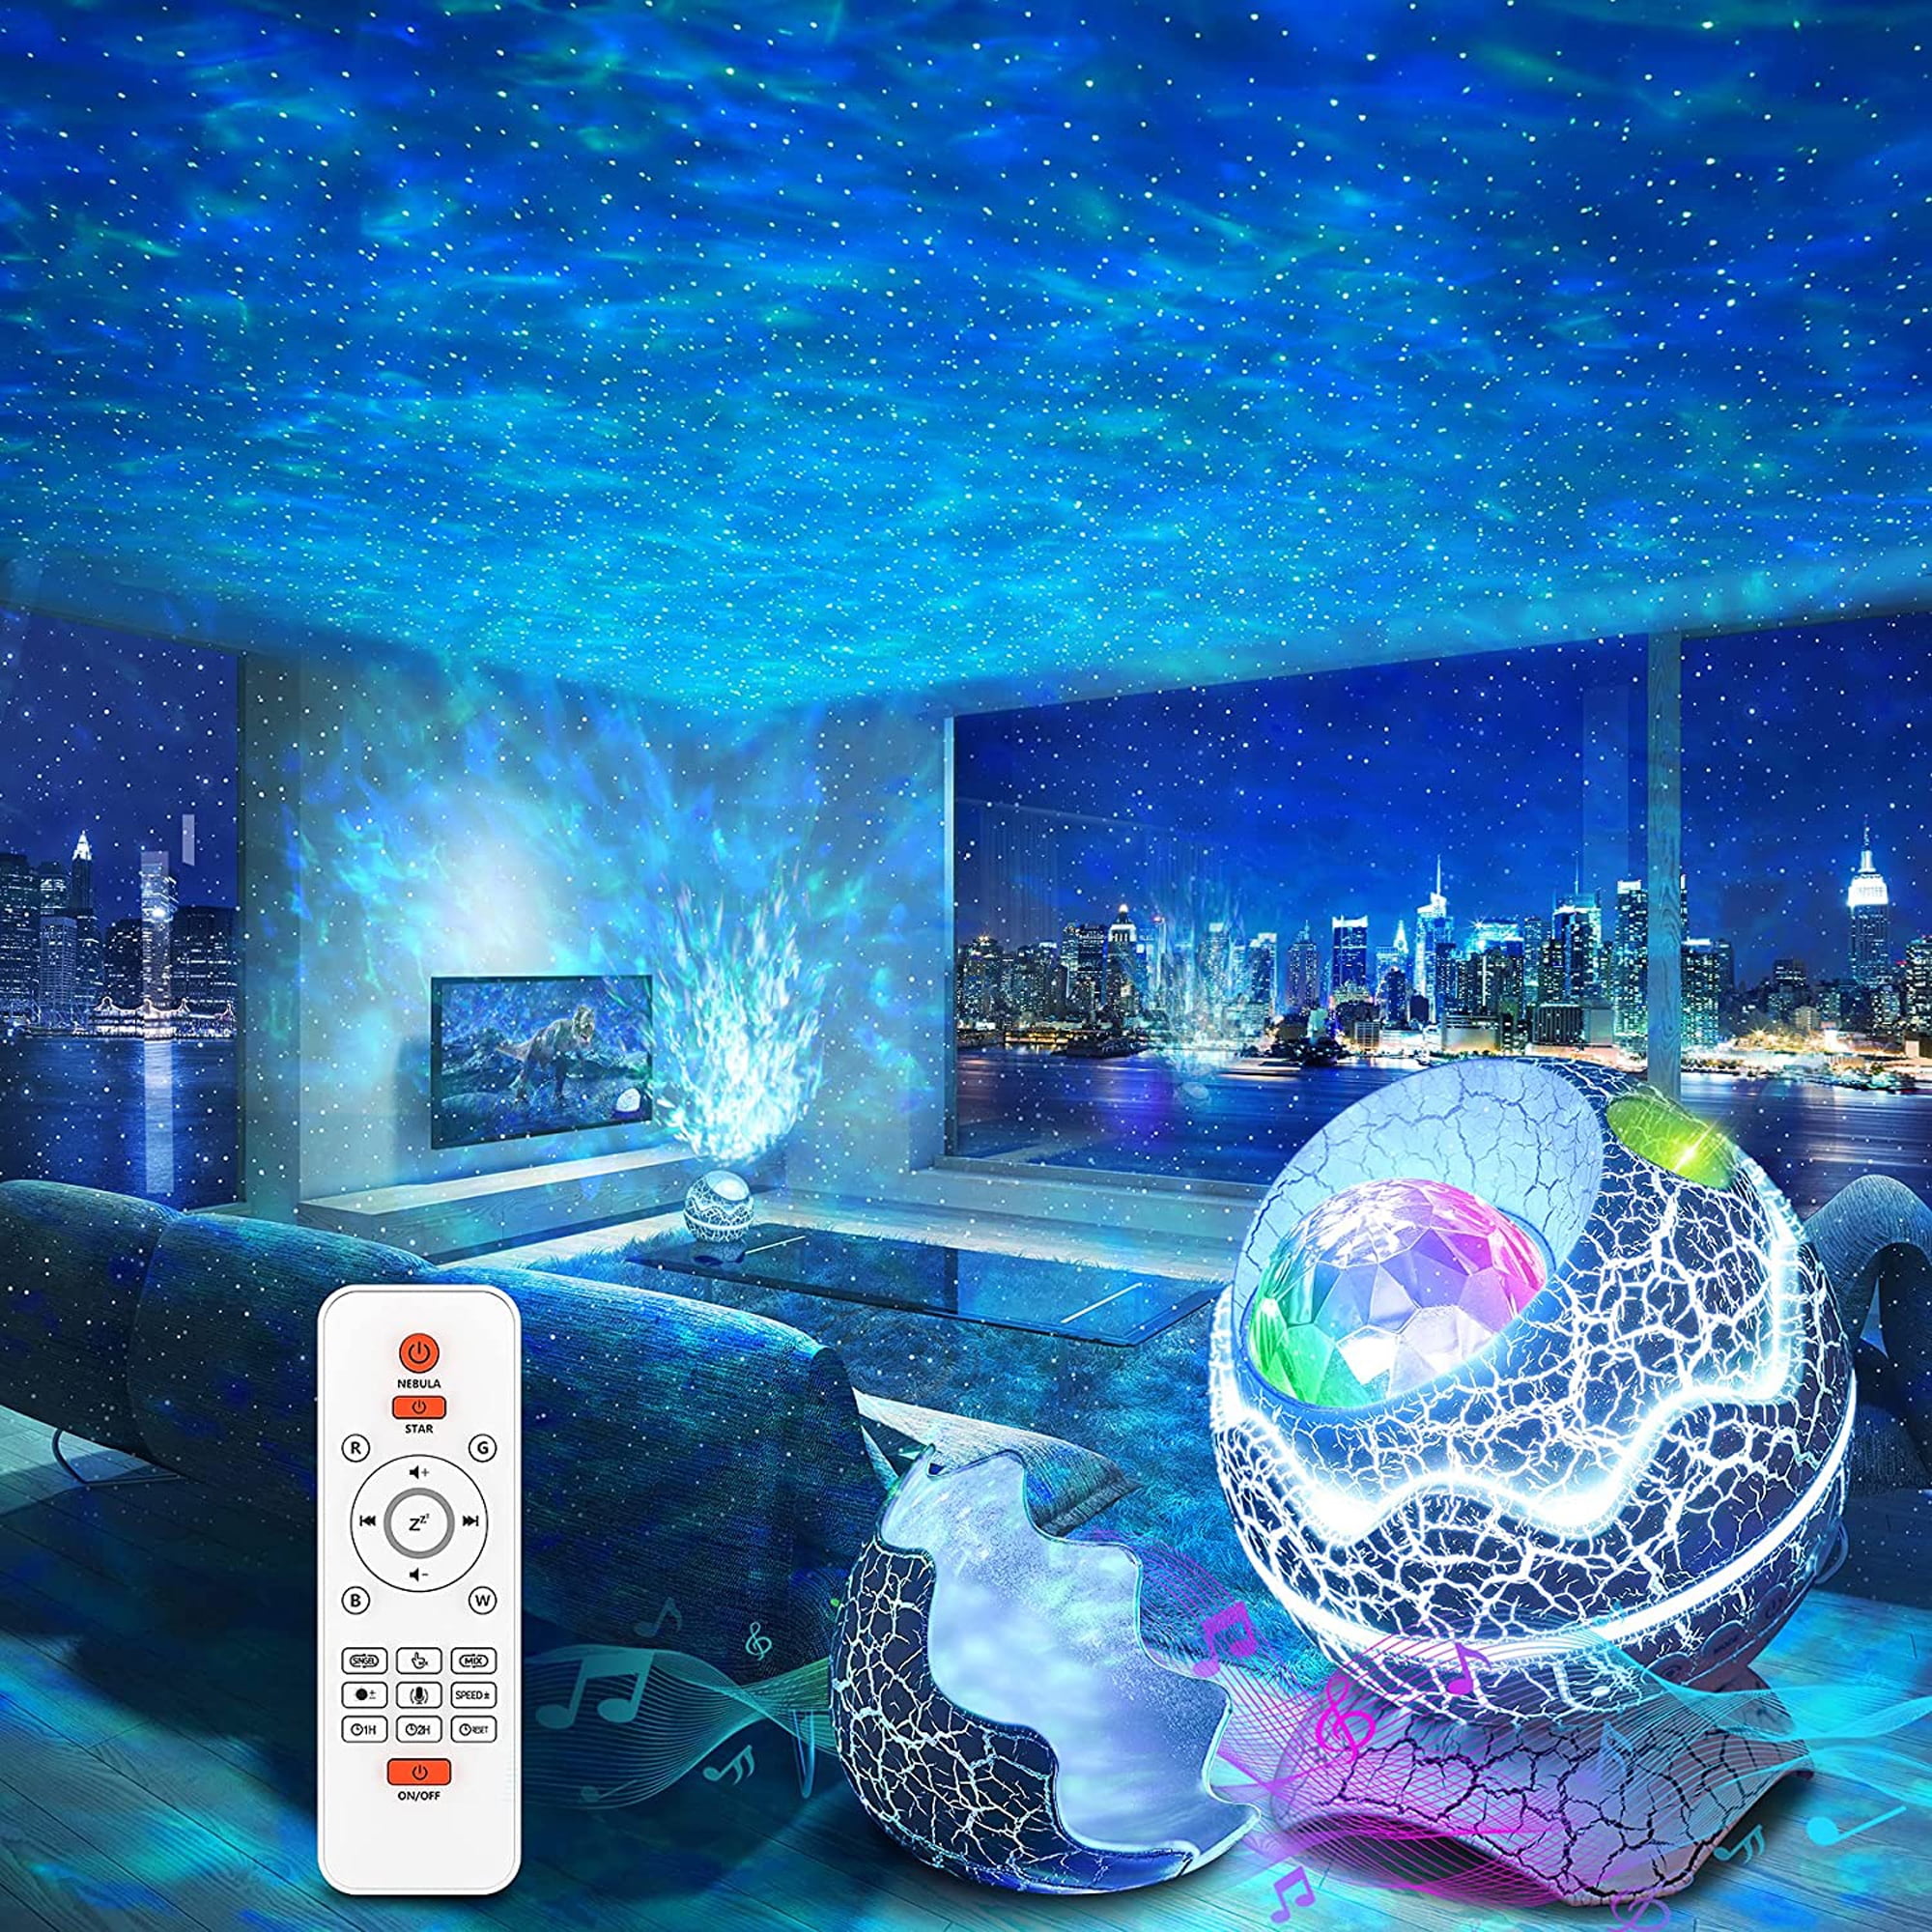 DasyFly LED Star Projector for Indoor Bedroom Ceiling Light